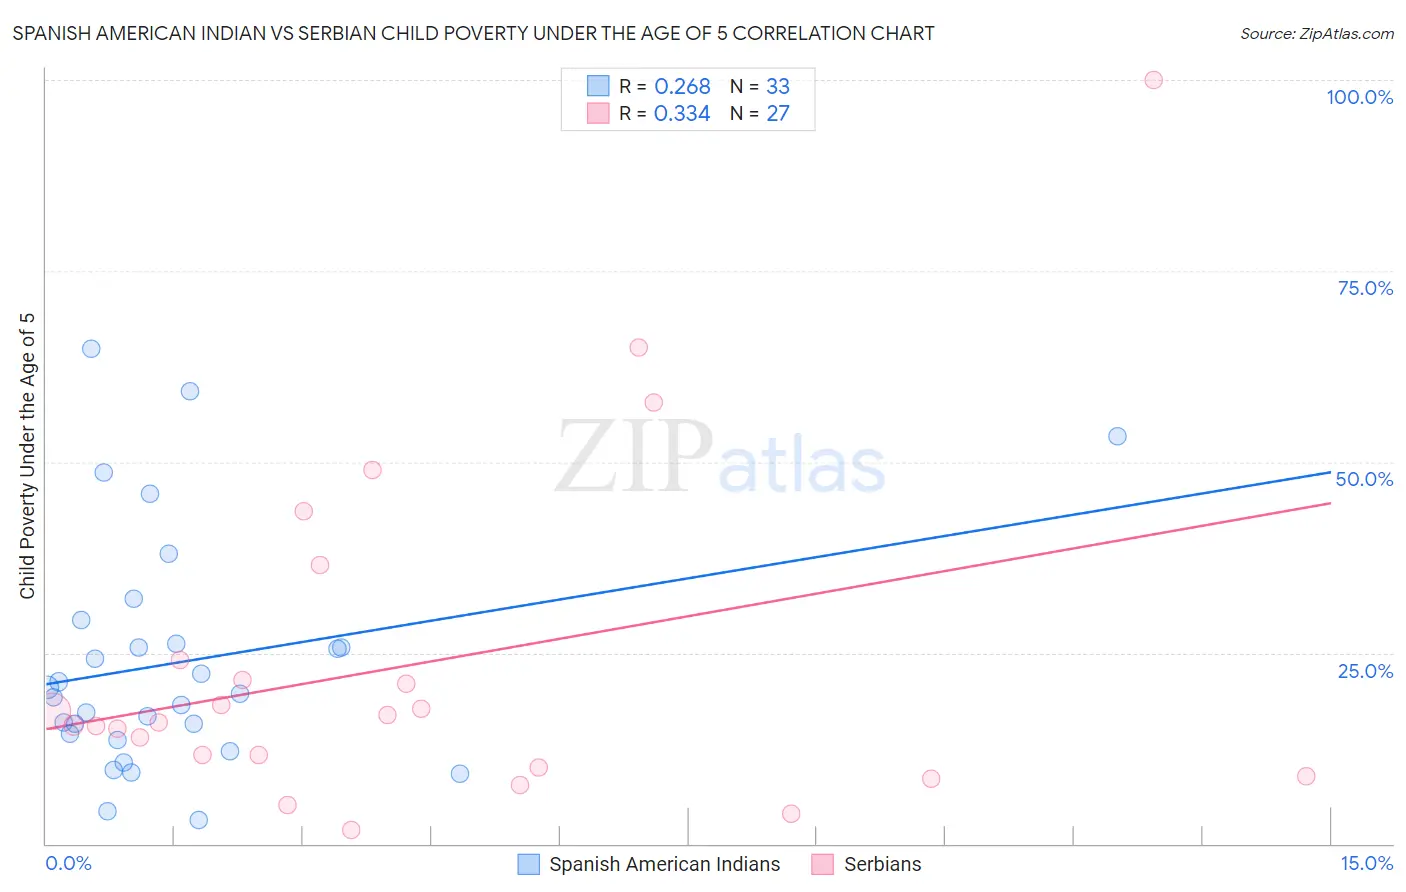 Spanish American Indian vs Serbian Child Poverty Under the Age of 5